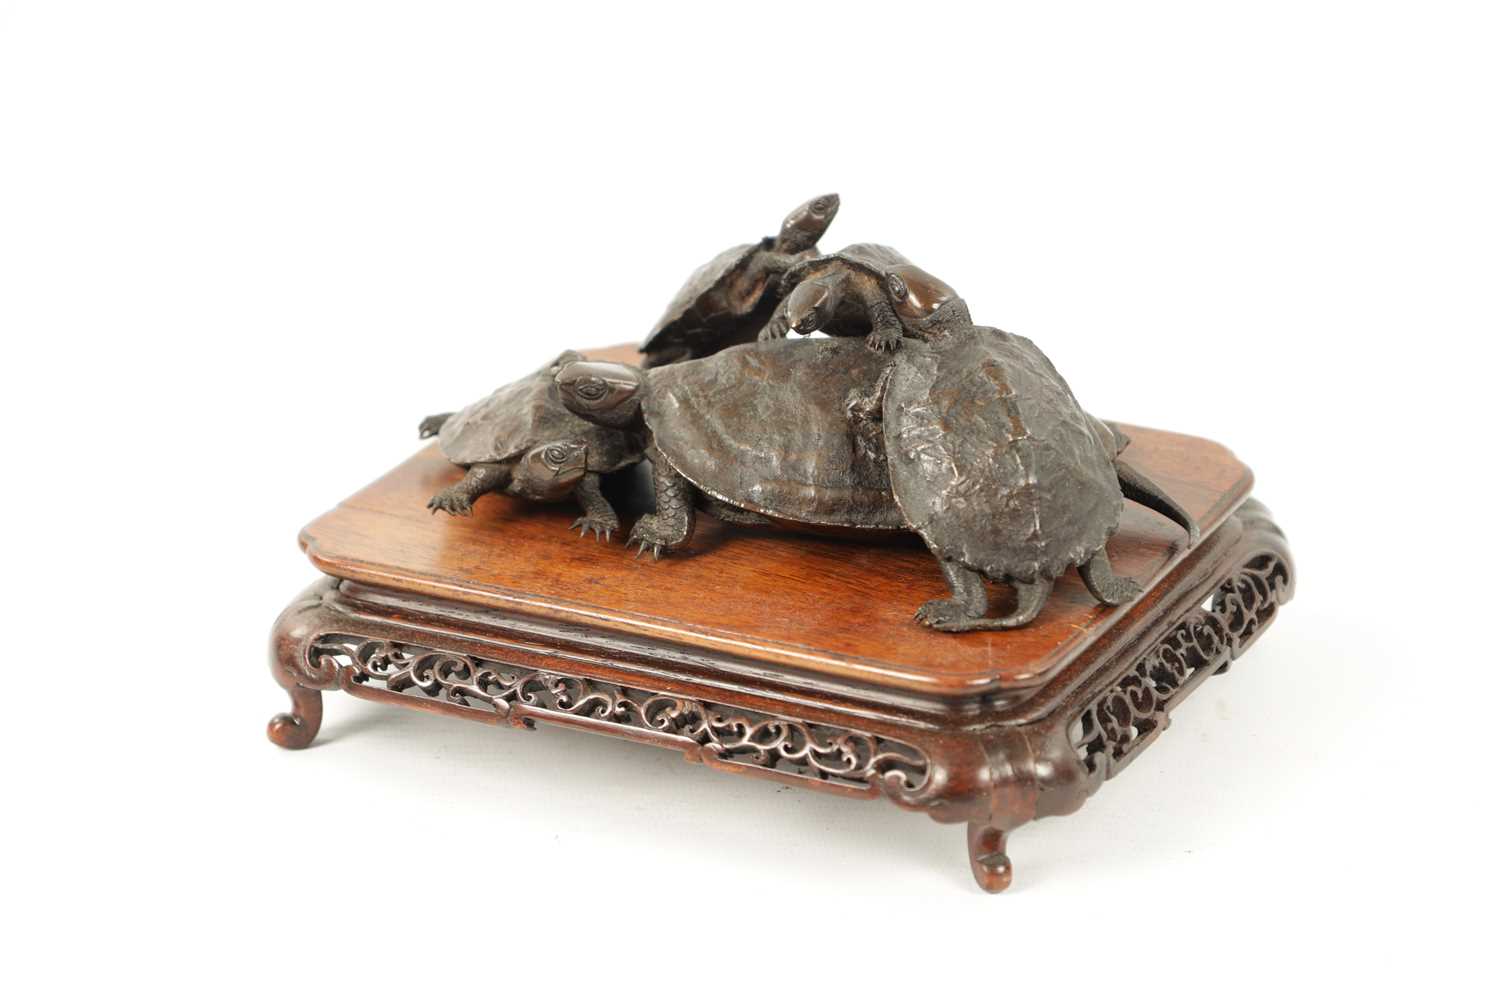 A FINE JAPANESE MEIJI PERIOD BRONZE SCULPTURE OF A GROUP OF TURTLES - Image 2 of 8